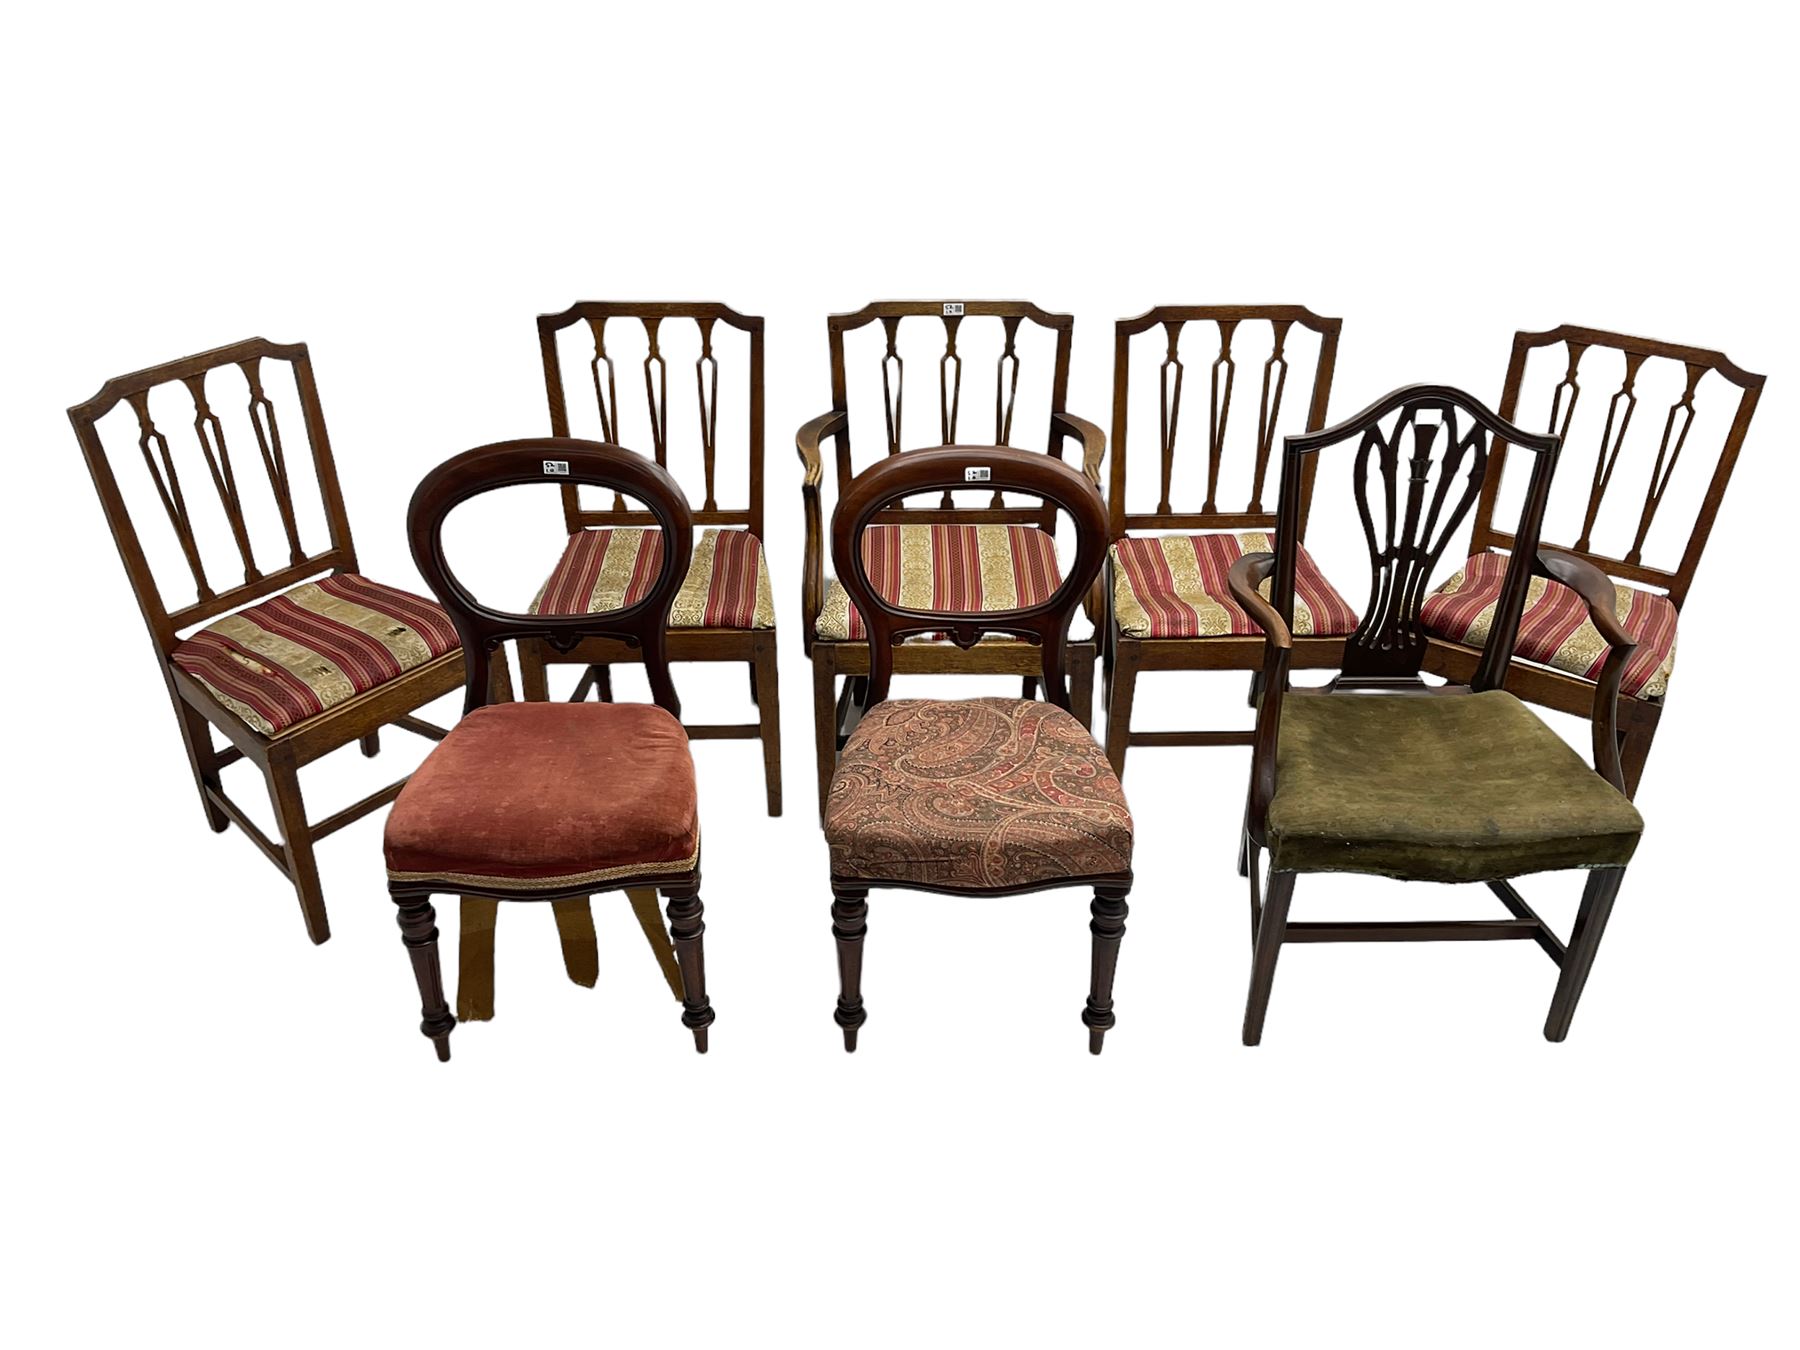 Four Victorian rosewood dining chairs - Image 7 of 7